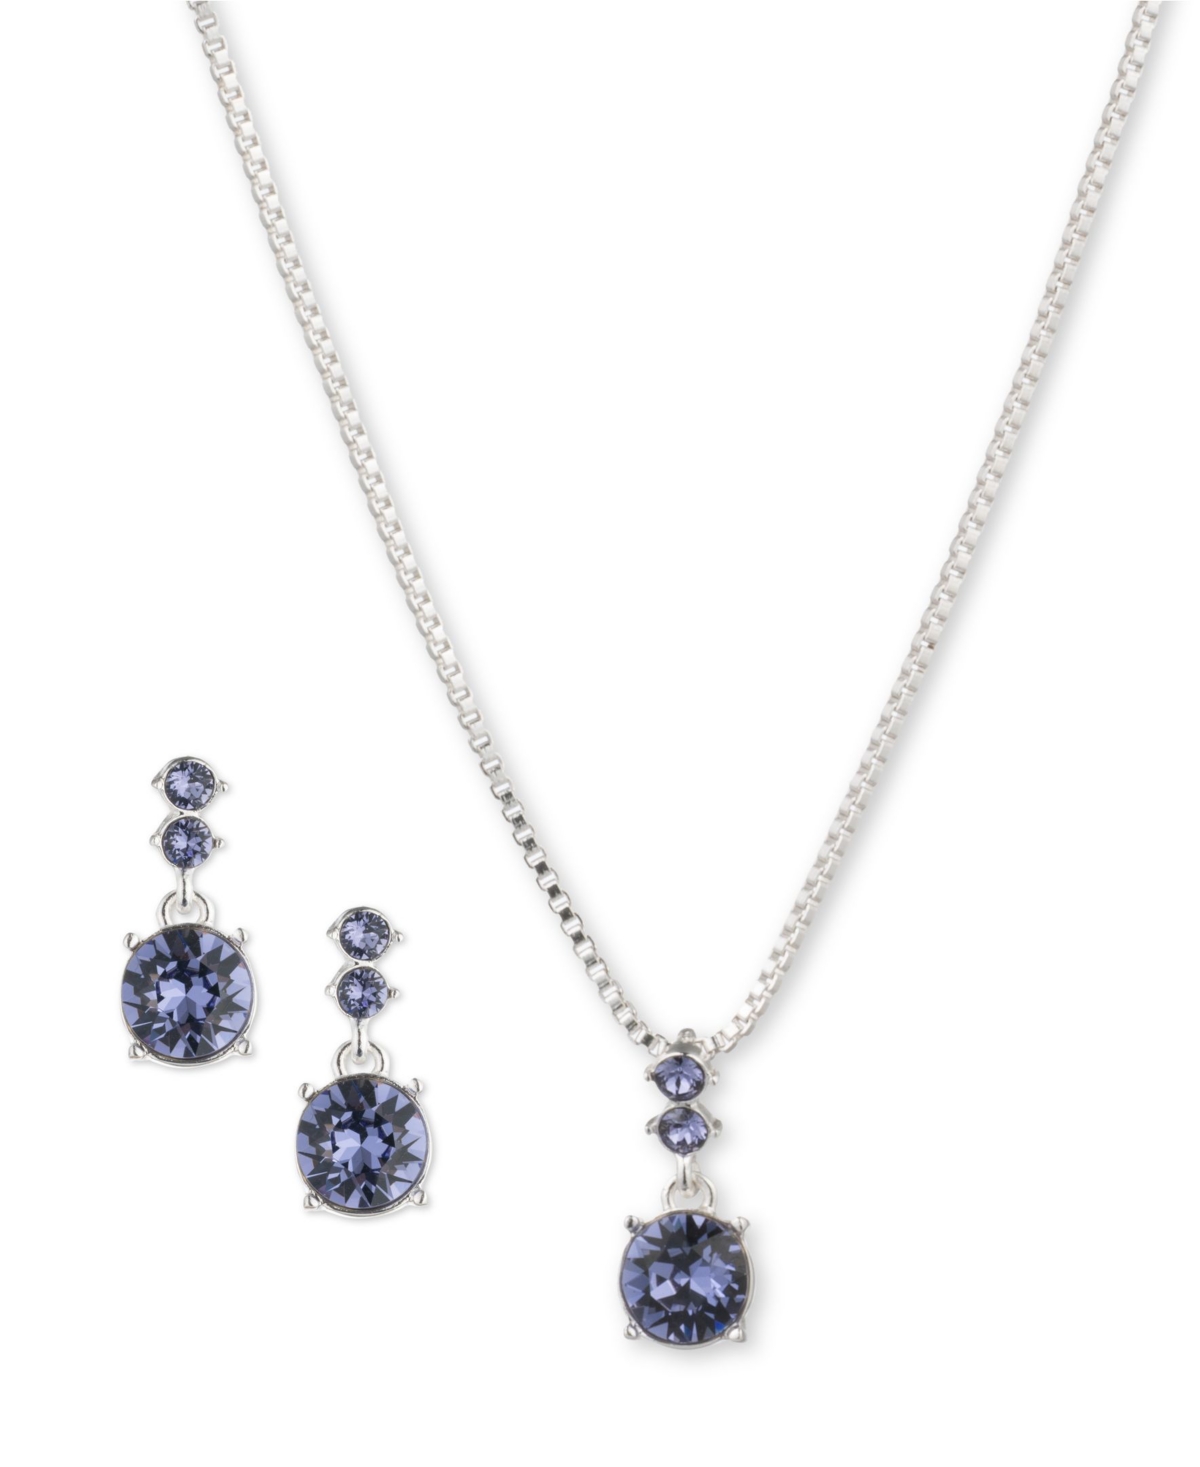 Boxed Necklace and Earring Set - Silver-tone